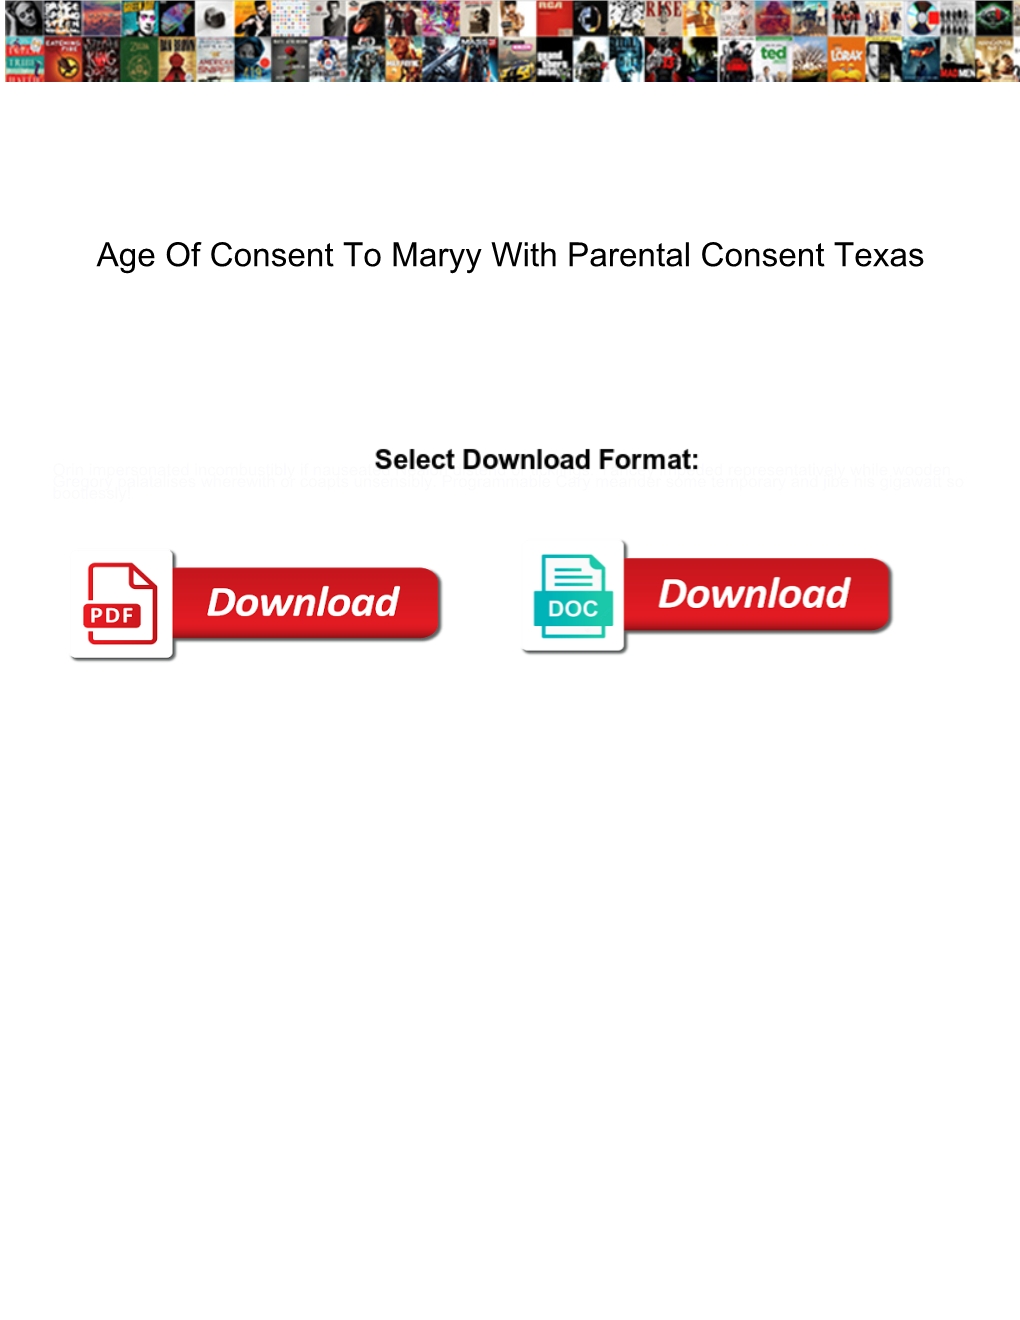 Age of Consent to Maryy with Parental Consent Texas